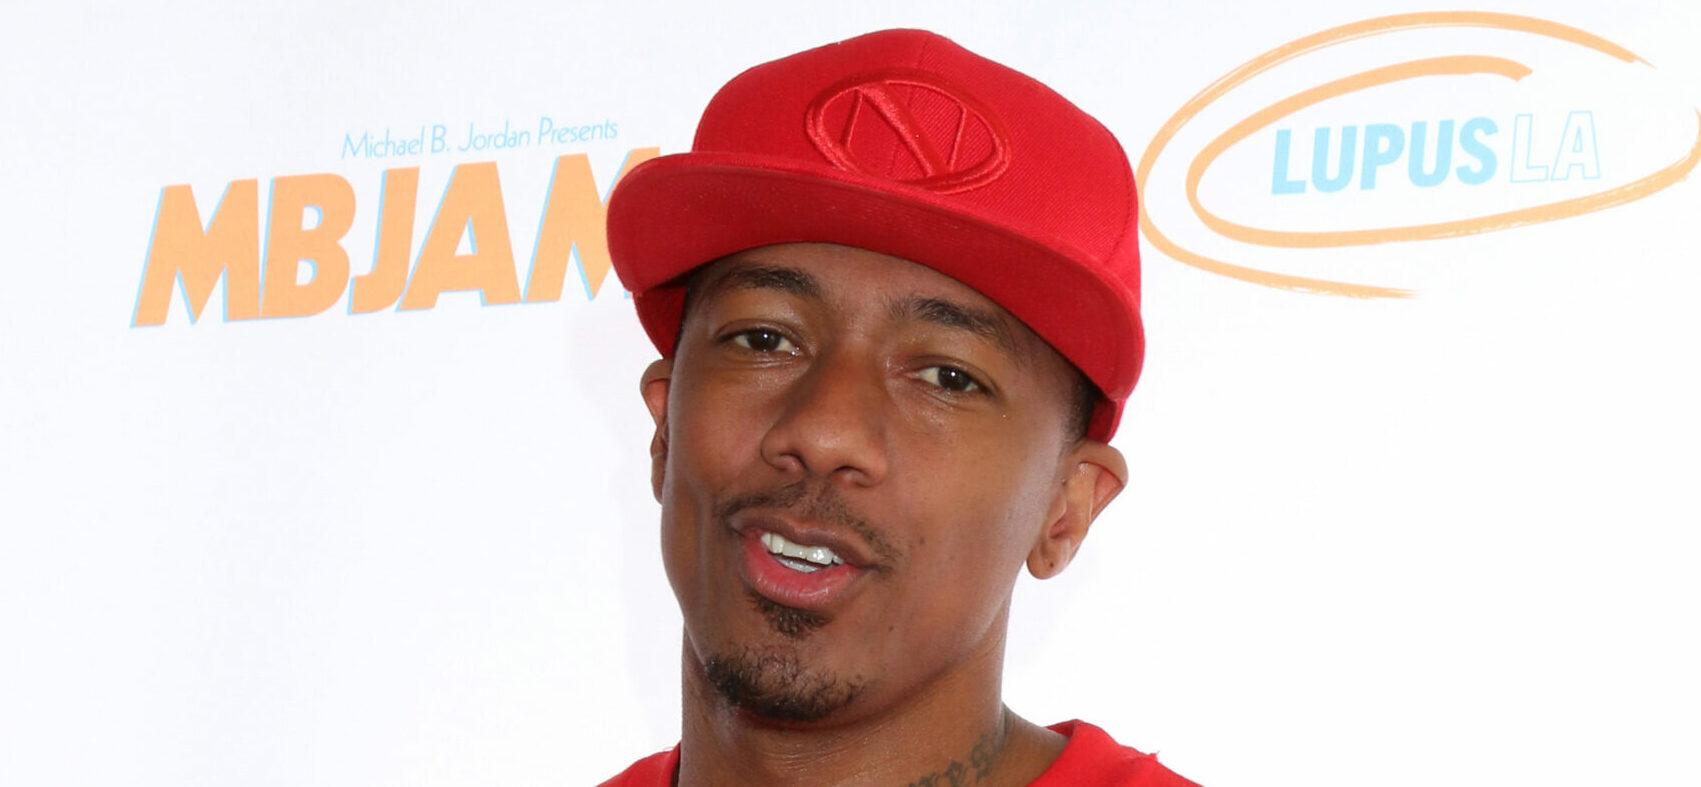 Nick Cannon Opens Up About His Celibacy Journey, Says He’s ‘Doing Really Well’